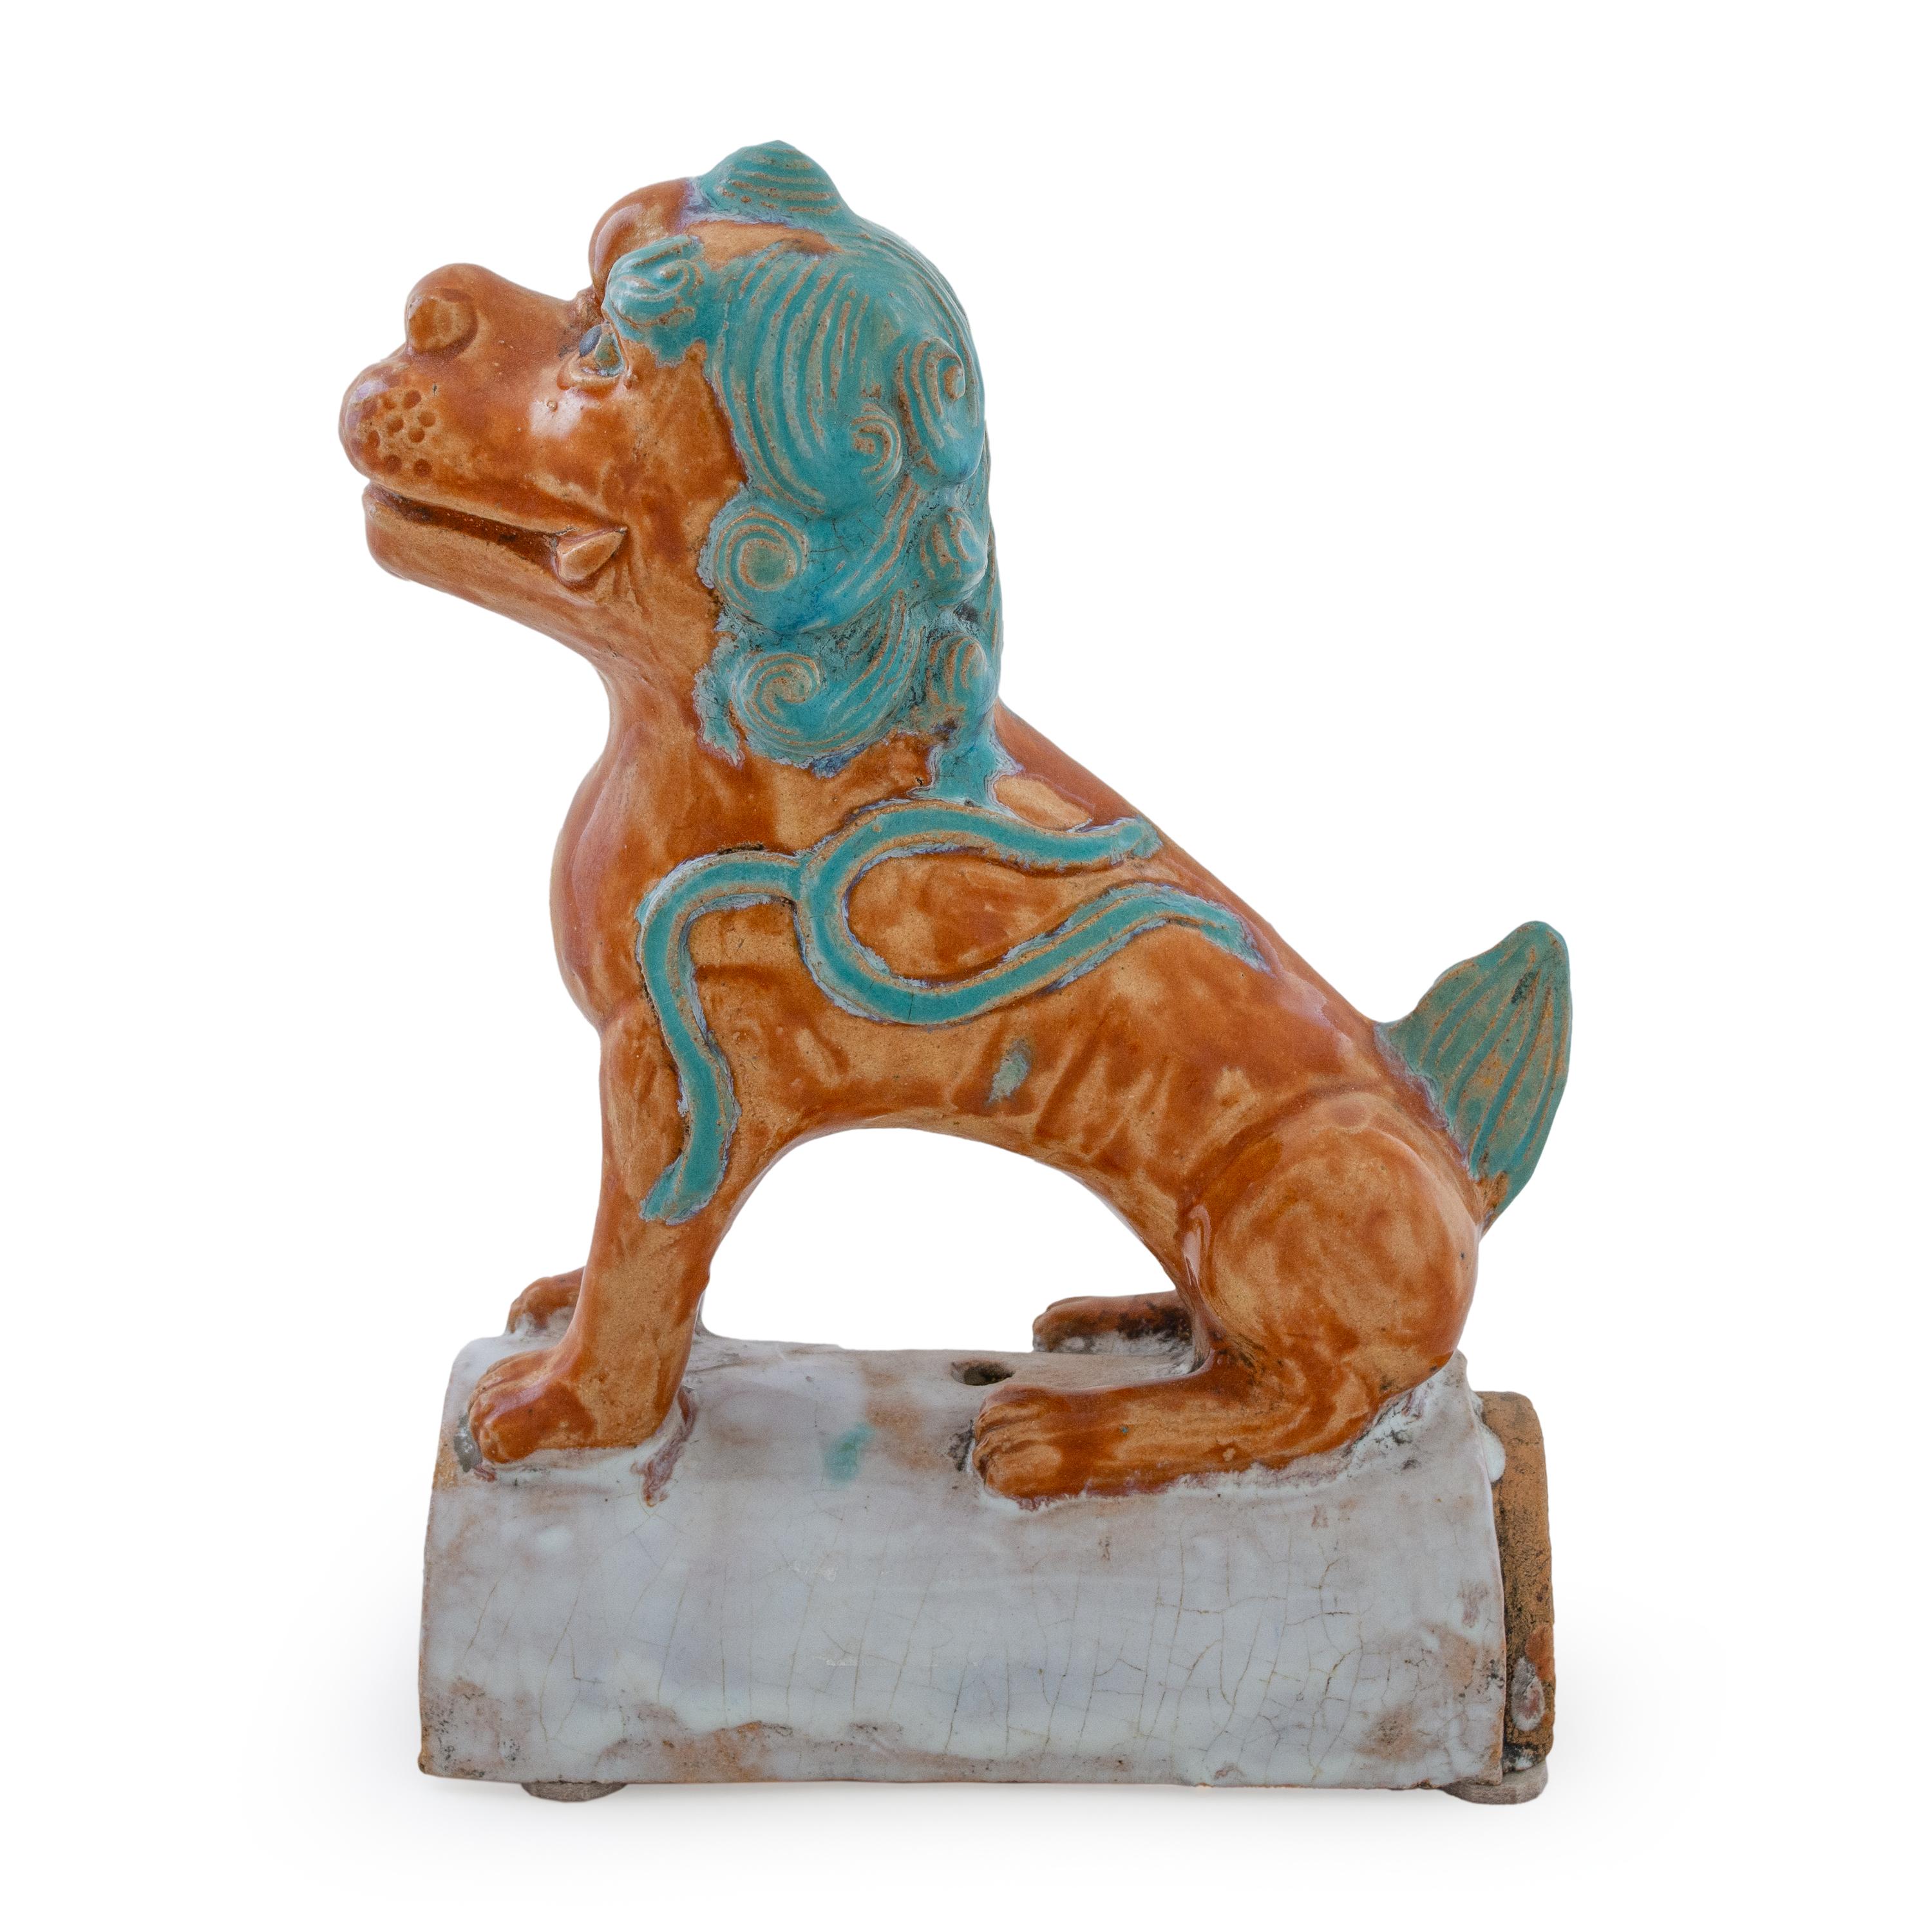 This is a charming pair of colorful terracotta roof tiles hand painted in turquoise and sienna.